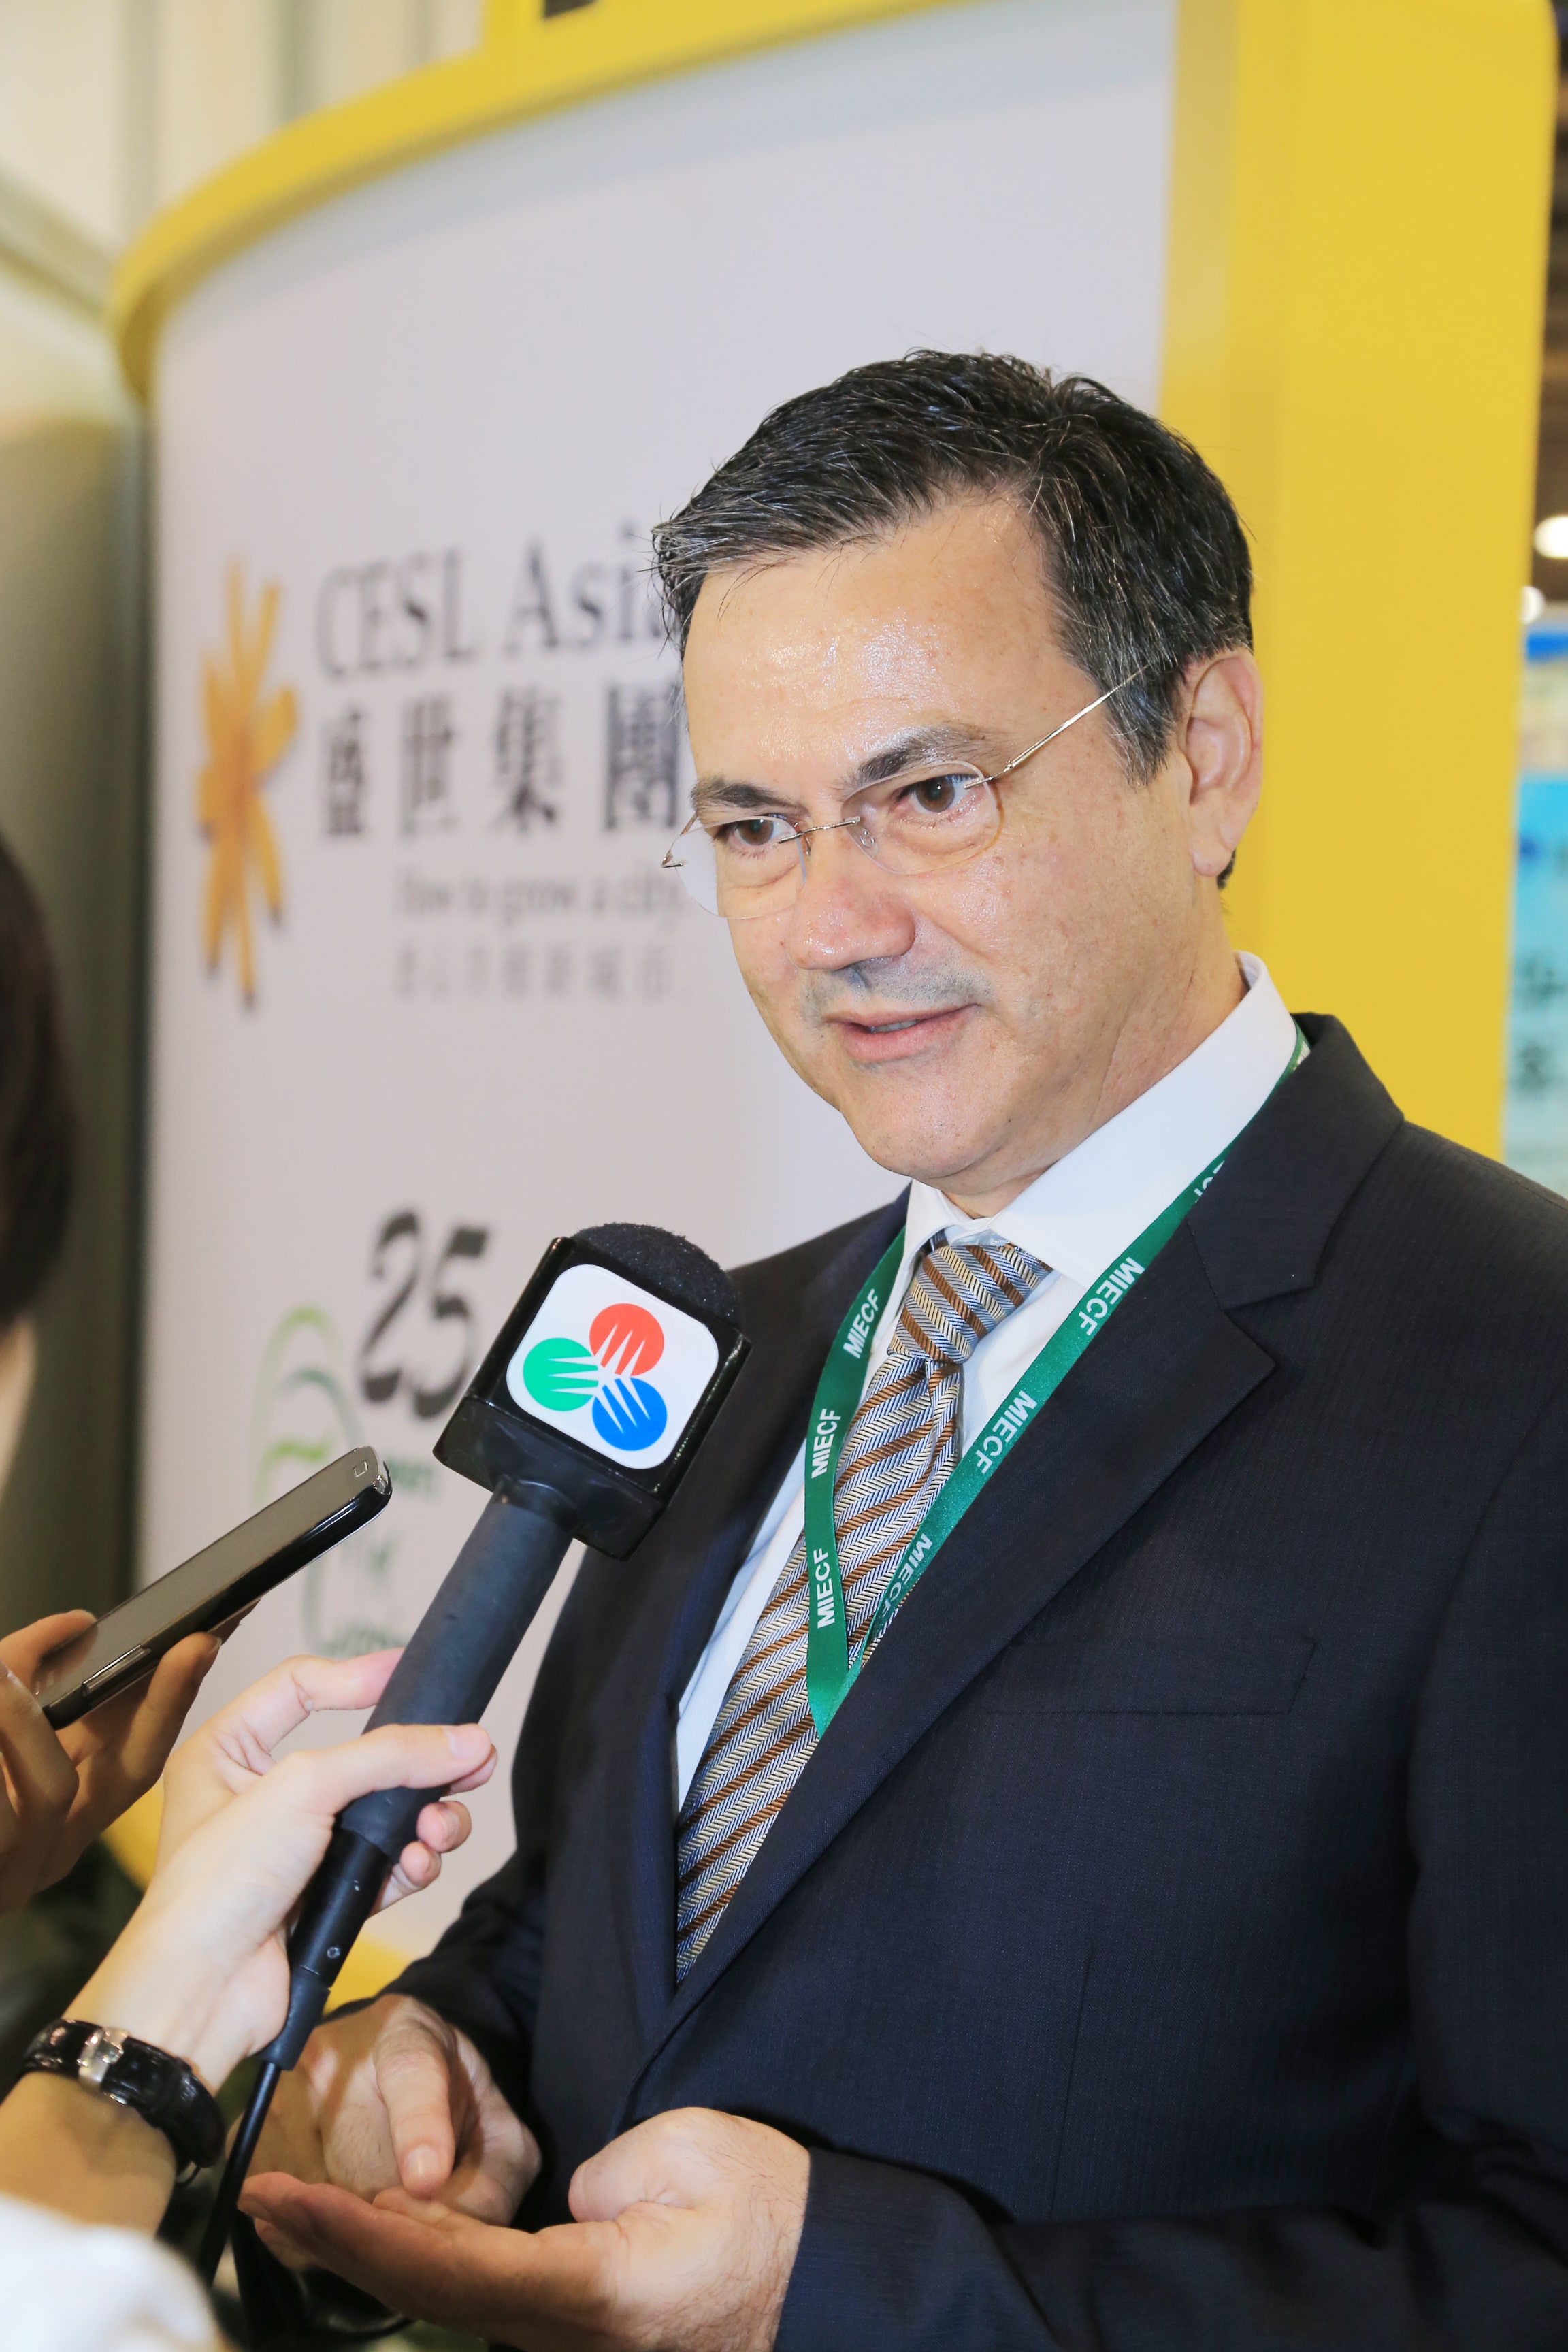 CESL Asia advocates higher investments in low-resources economy and in people development to achieve sustainability and a maximum potential for the development of the company, it’s people and Macau.